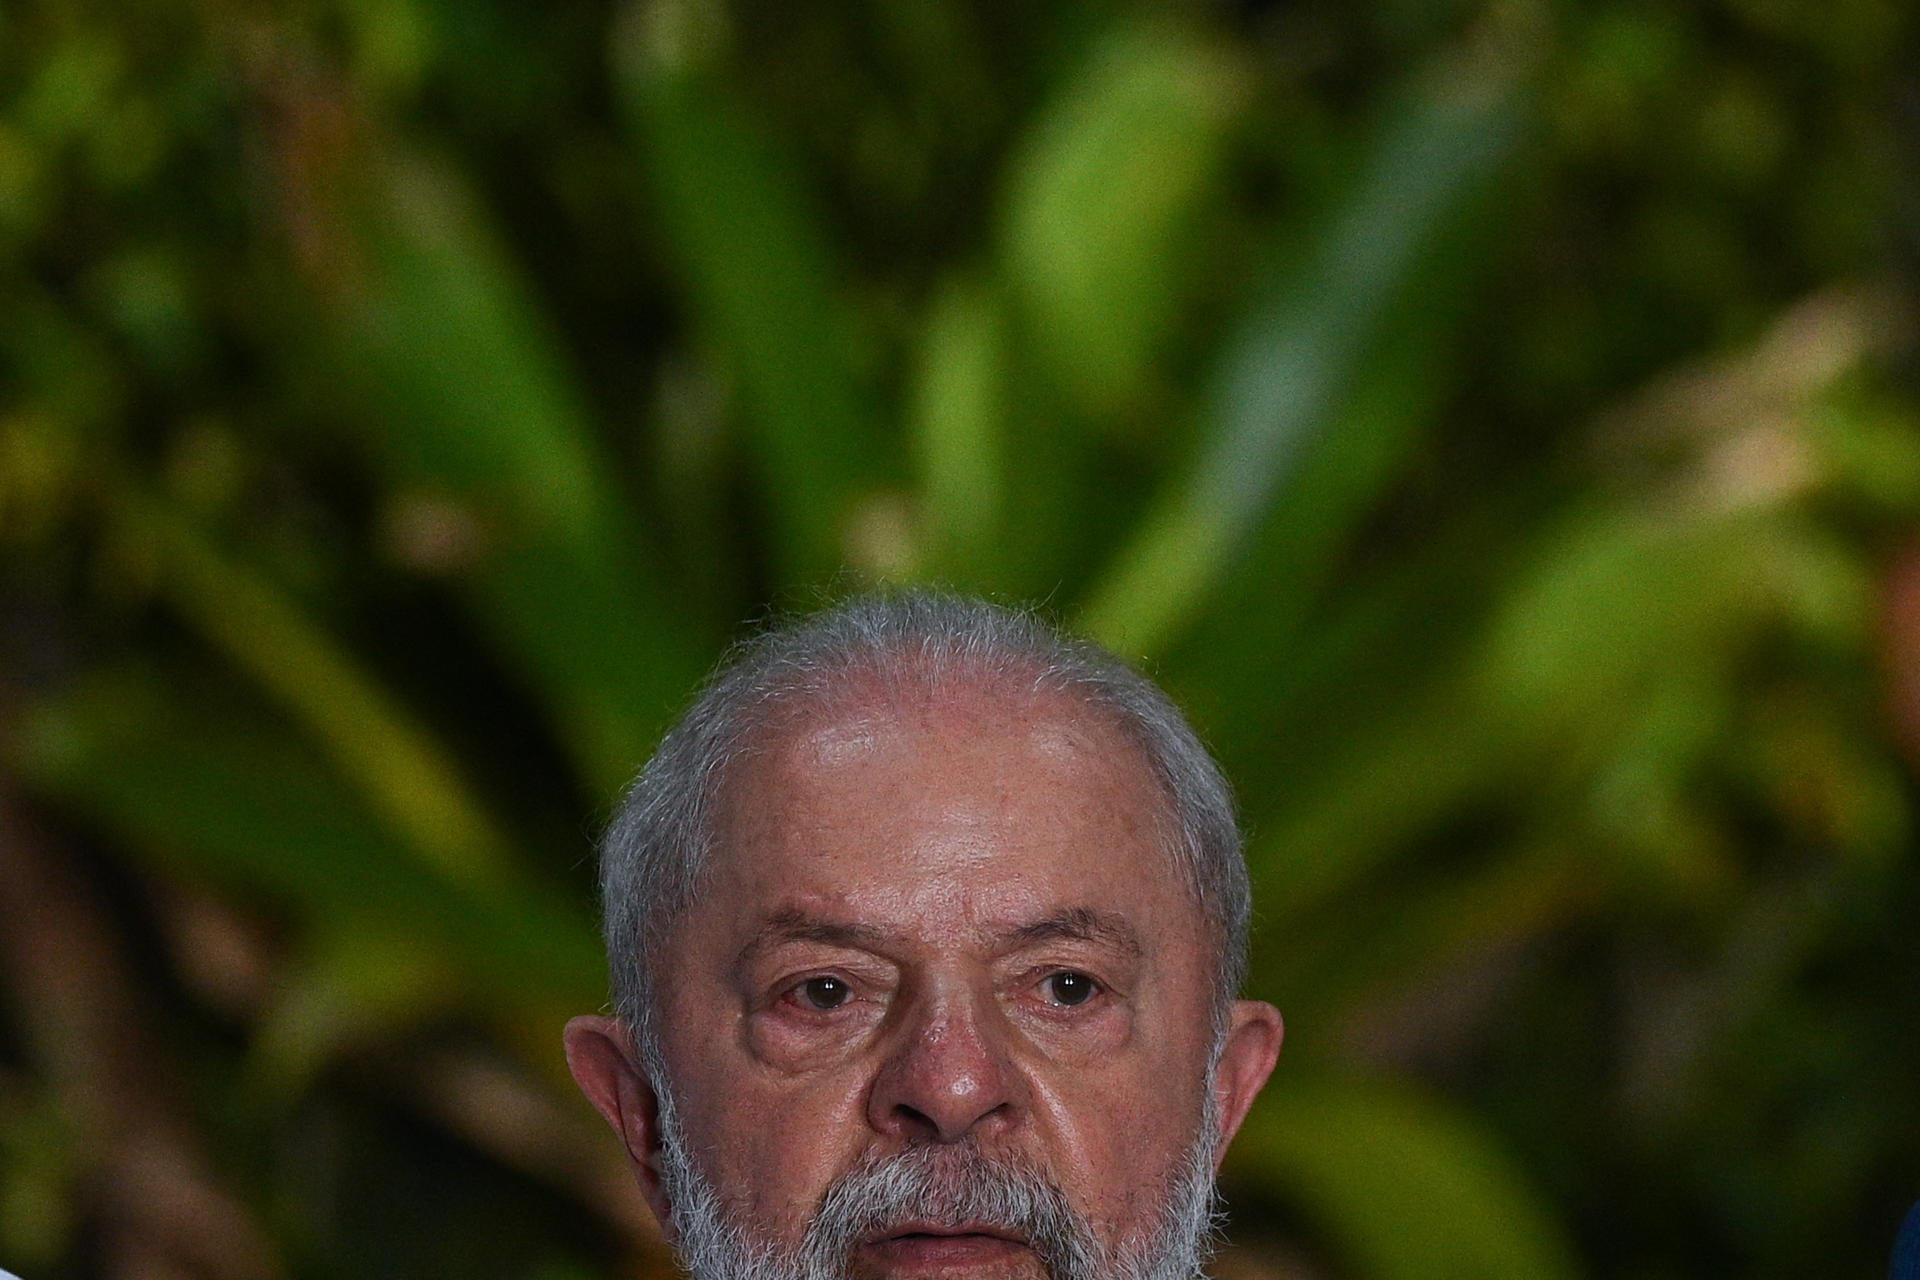 Brazilian President Luiz Inacio Lula da Silva participates in activities on the second day (9 August 2023) of a summit of heads of state and government of member countries of the Amazon Cooperation Treaty Organization: Bolivia, Brazil, Colombia, Ecuador, Guyana, Peru, Suriname, and Venezuela. The two-day event was held in Belem, Brazil. EFE/Andre Borges